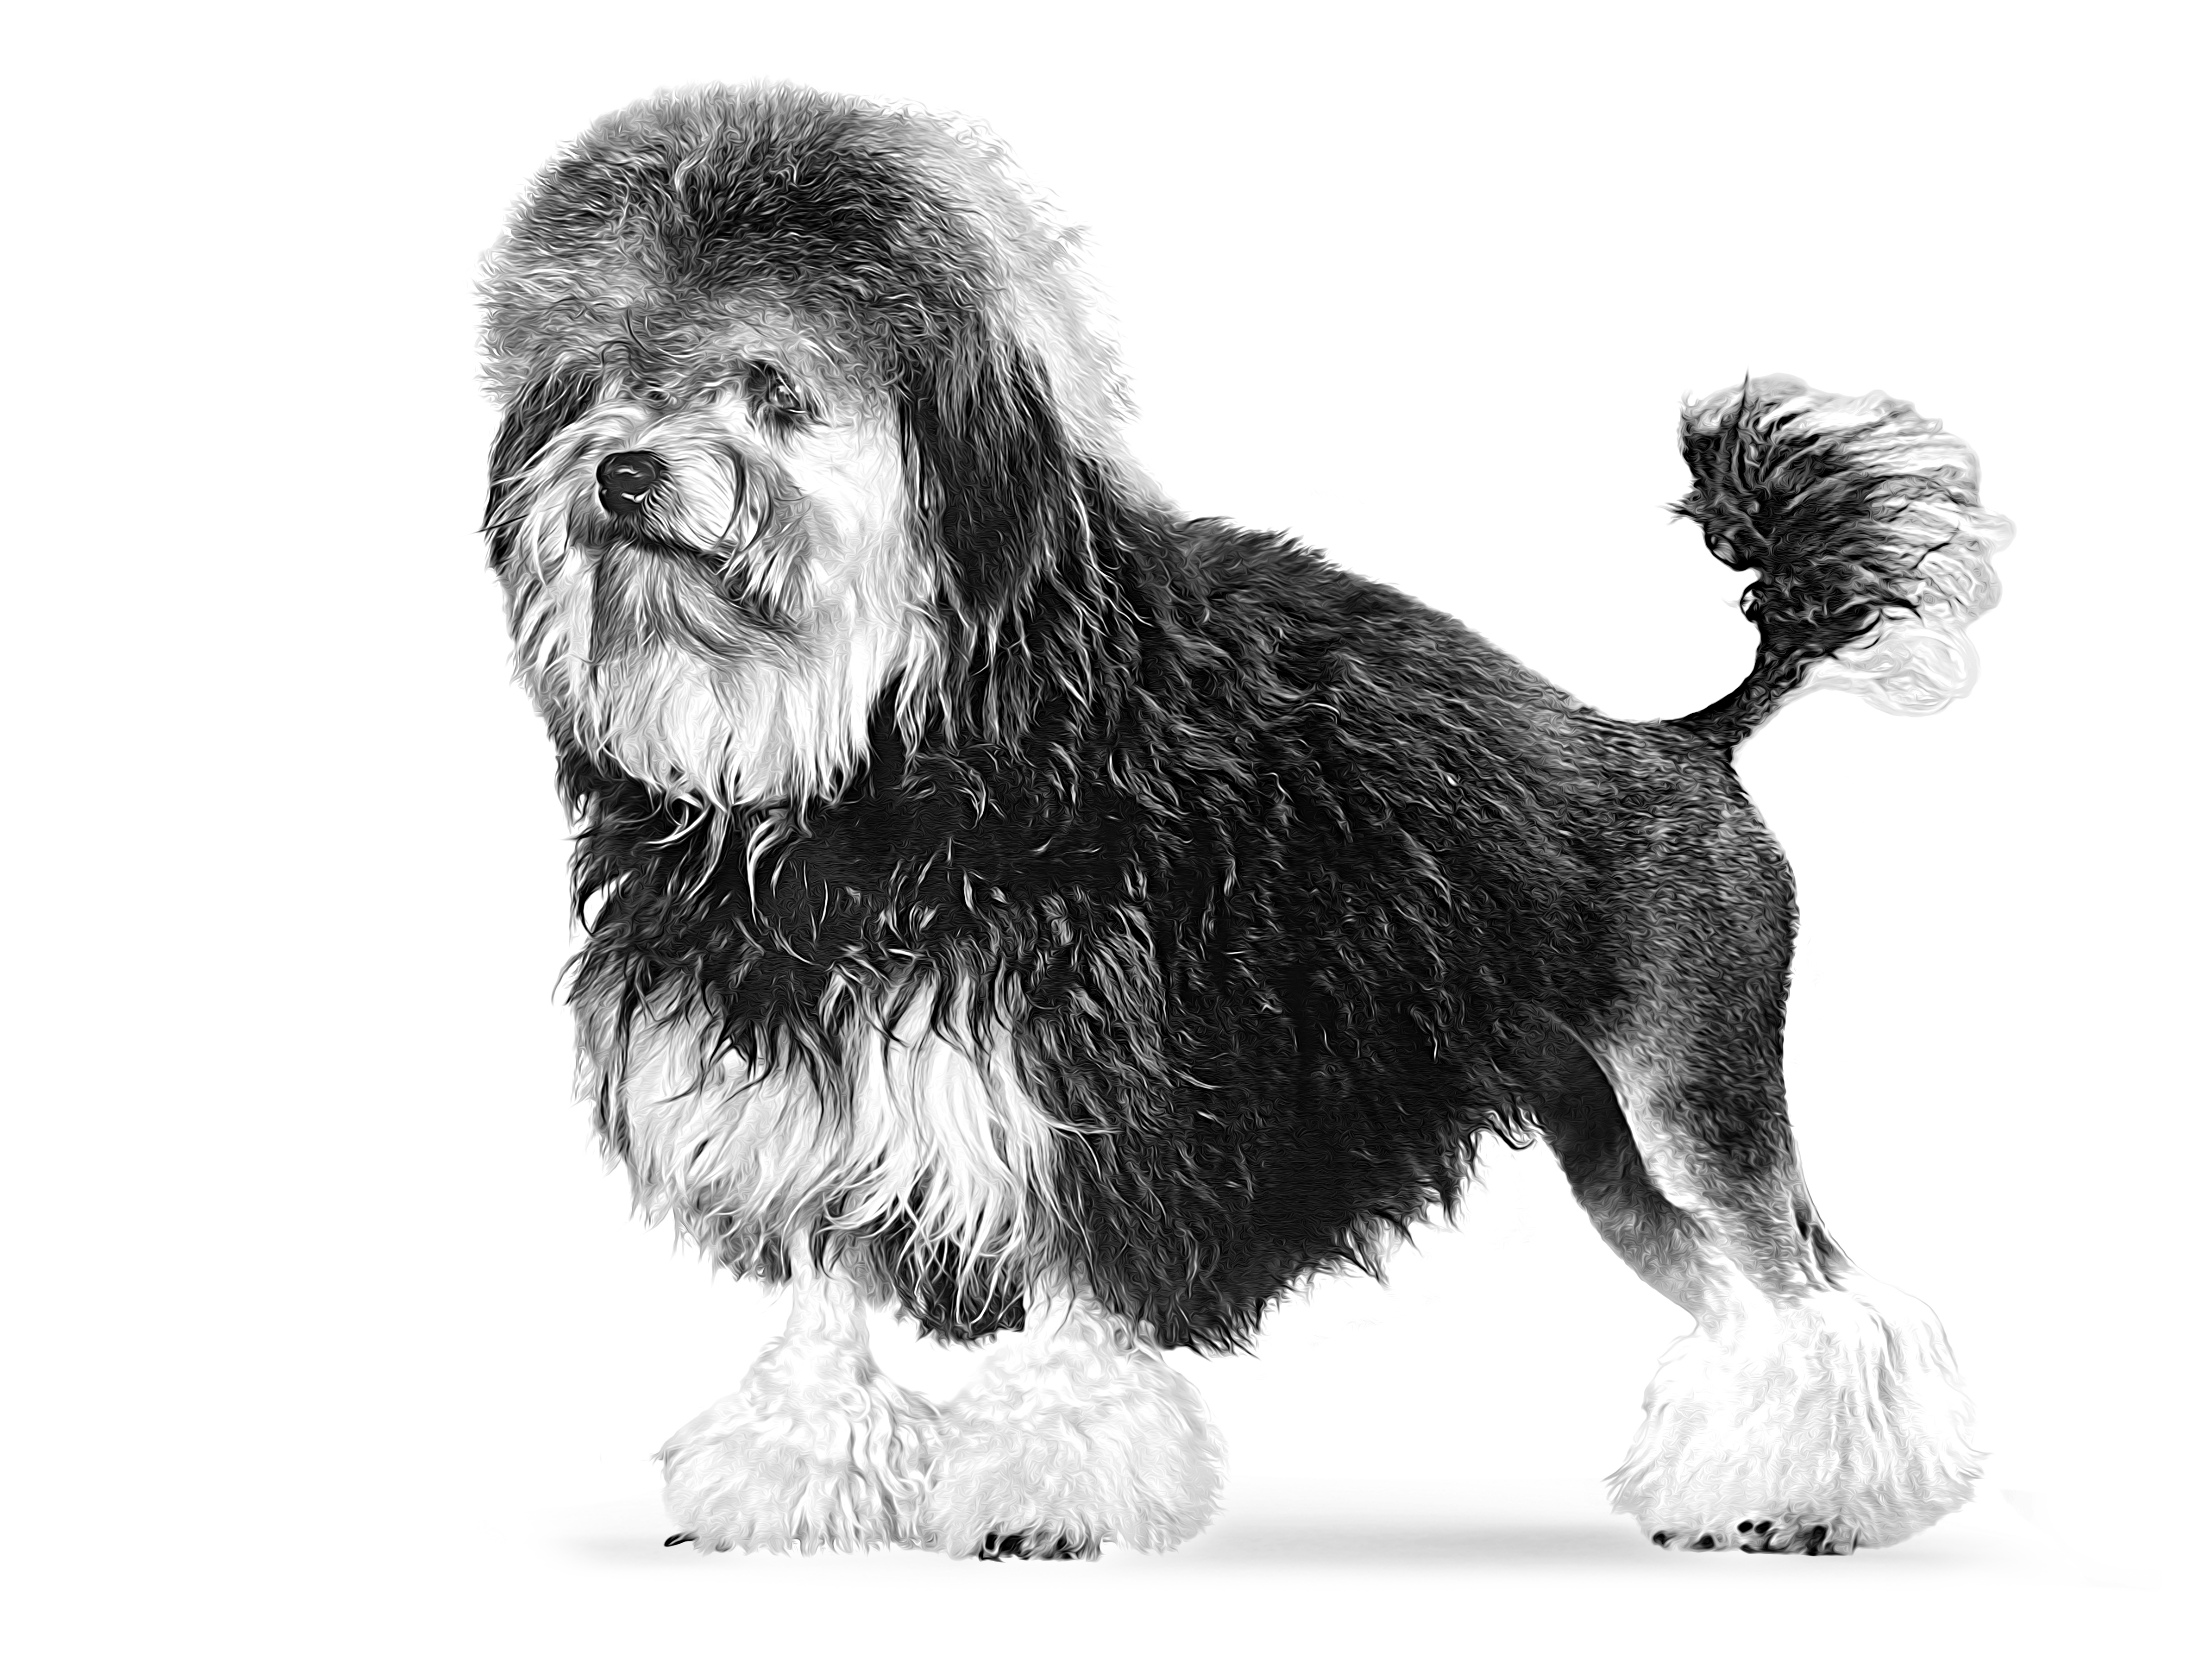 Lowchen - Little Lion Dog adult black and white